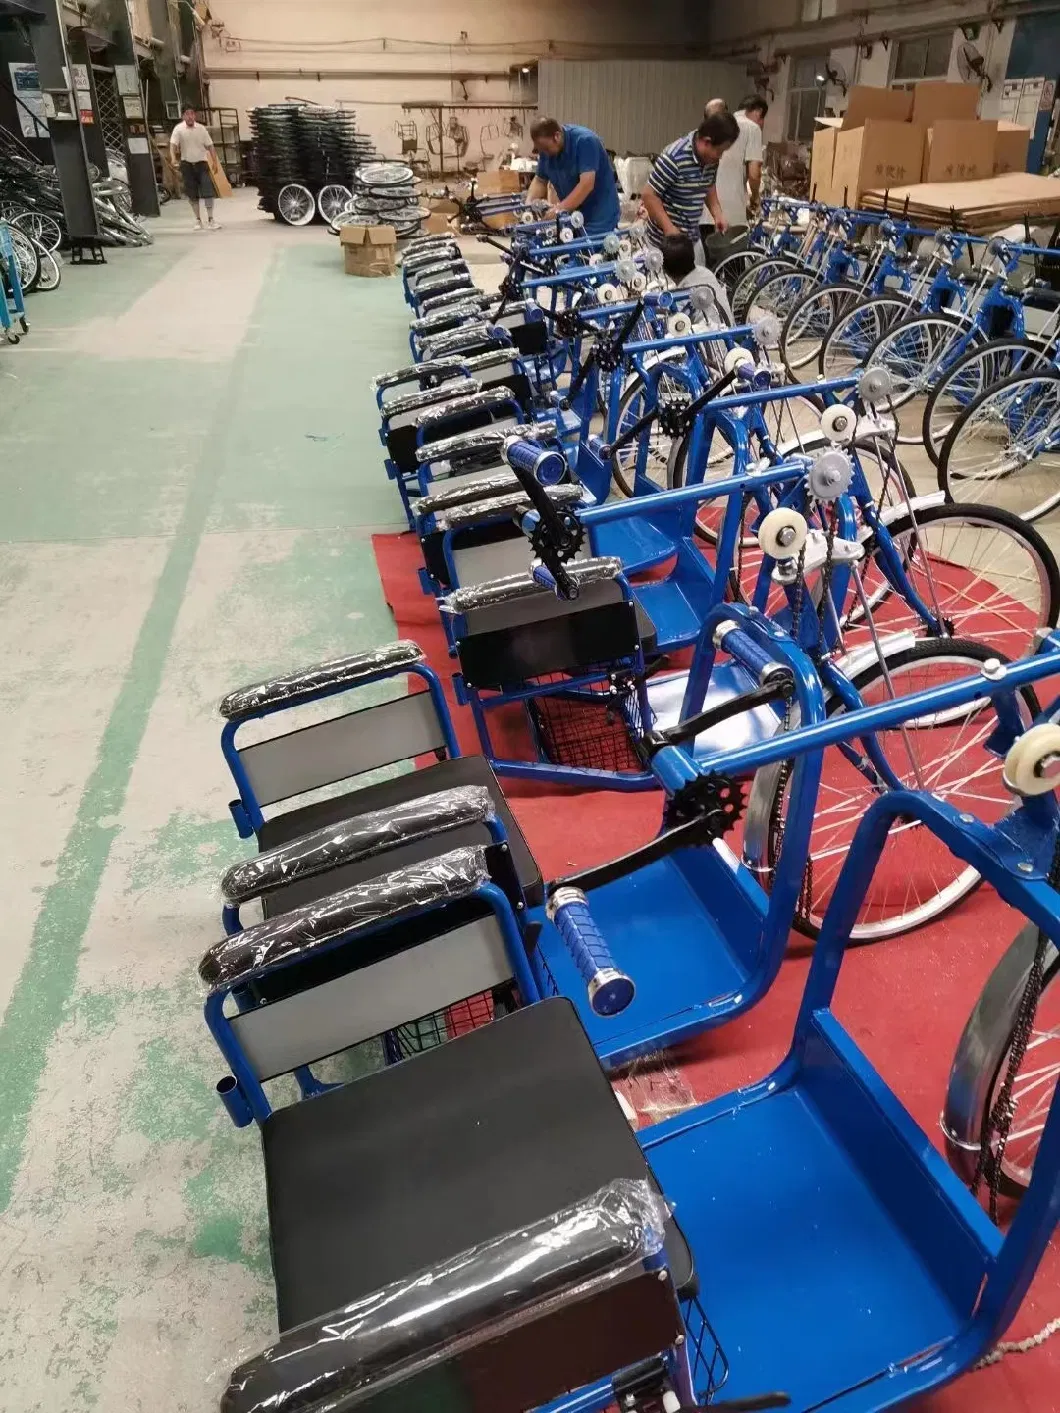 Tricycle Cargo Bike Motorized Tricycles Bike Tricycle for Elderly Handicapped